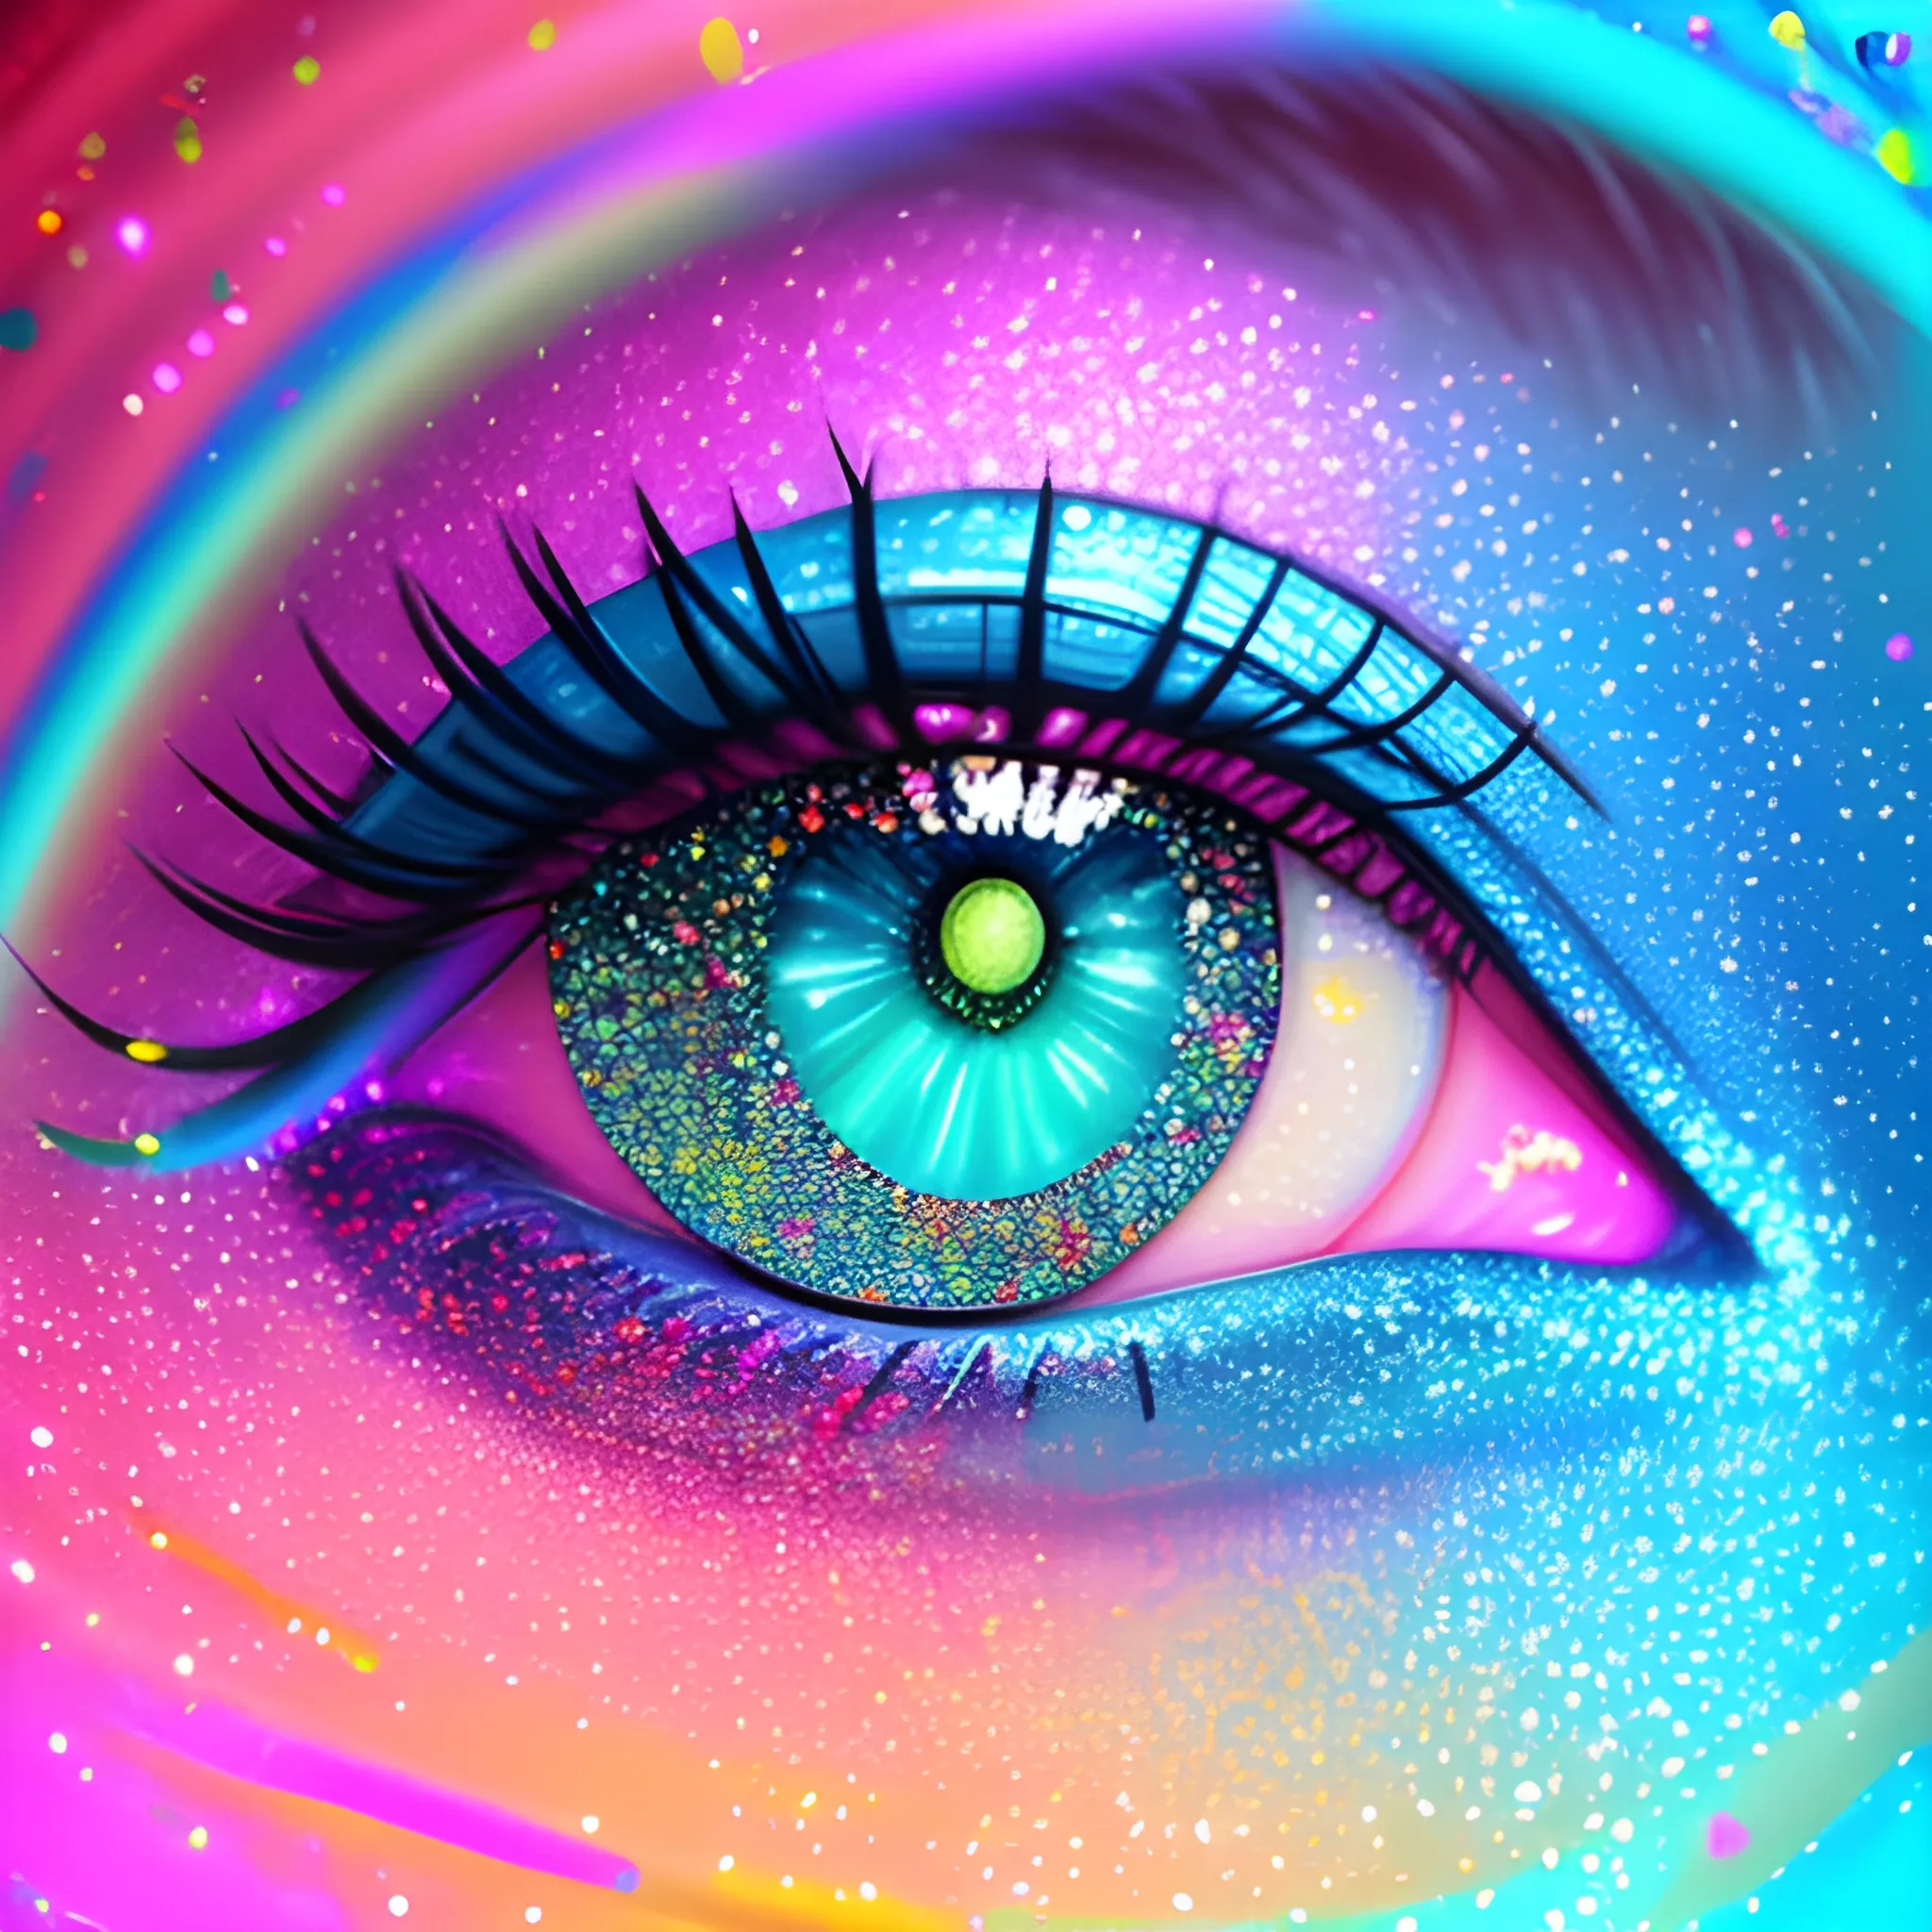 “Colorful image, corporative, eyes, glitter, sparks, soft colors ...